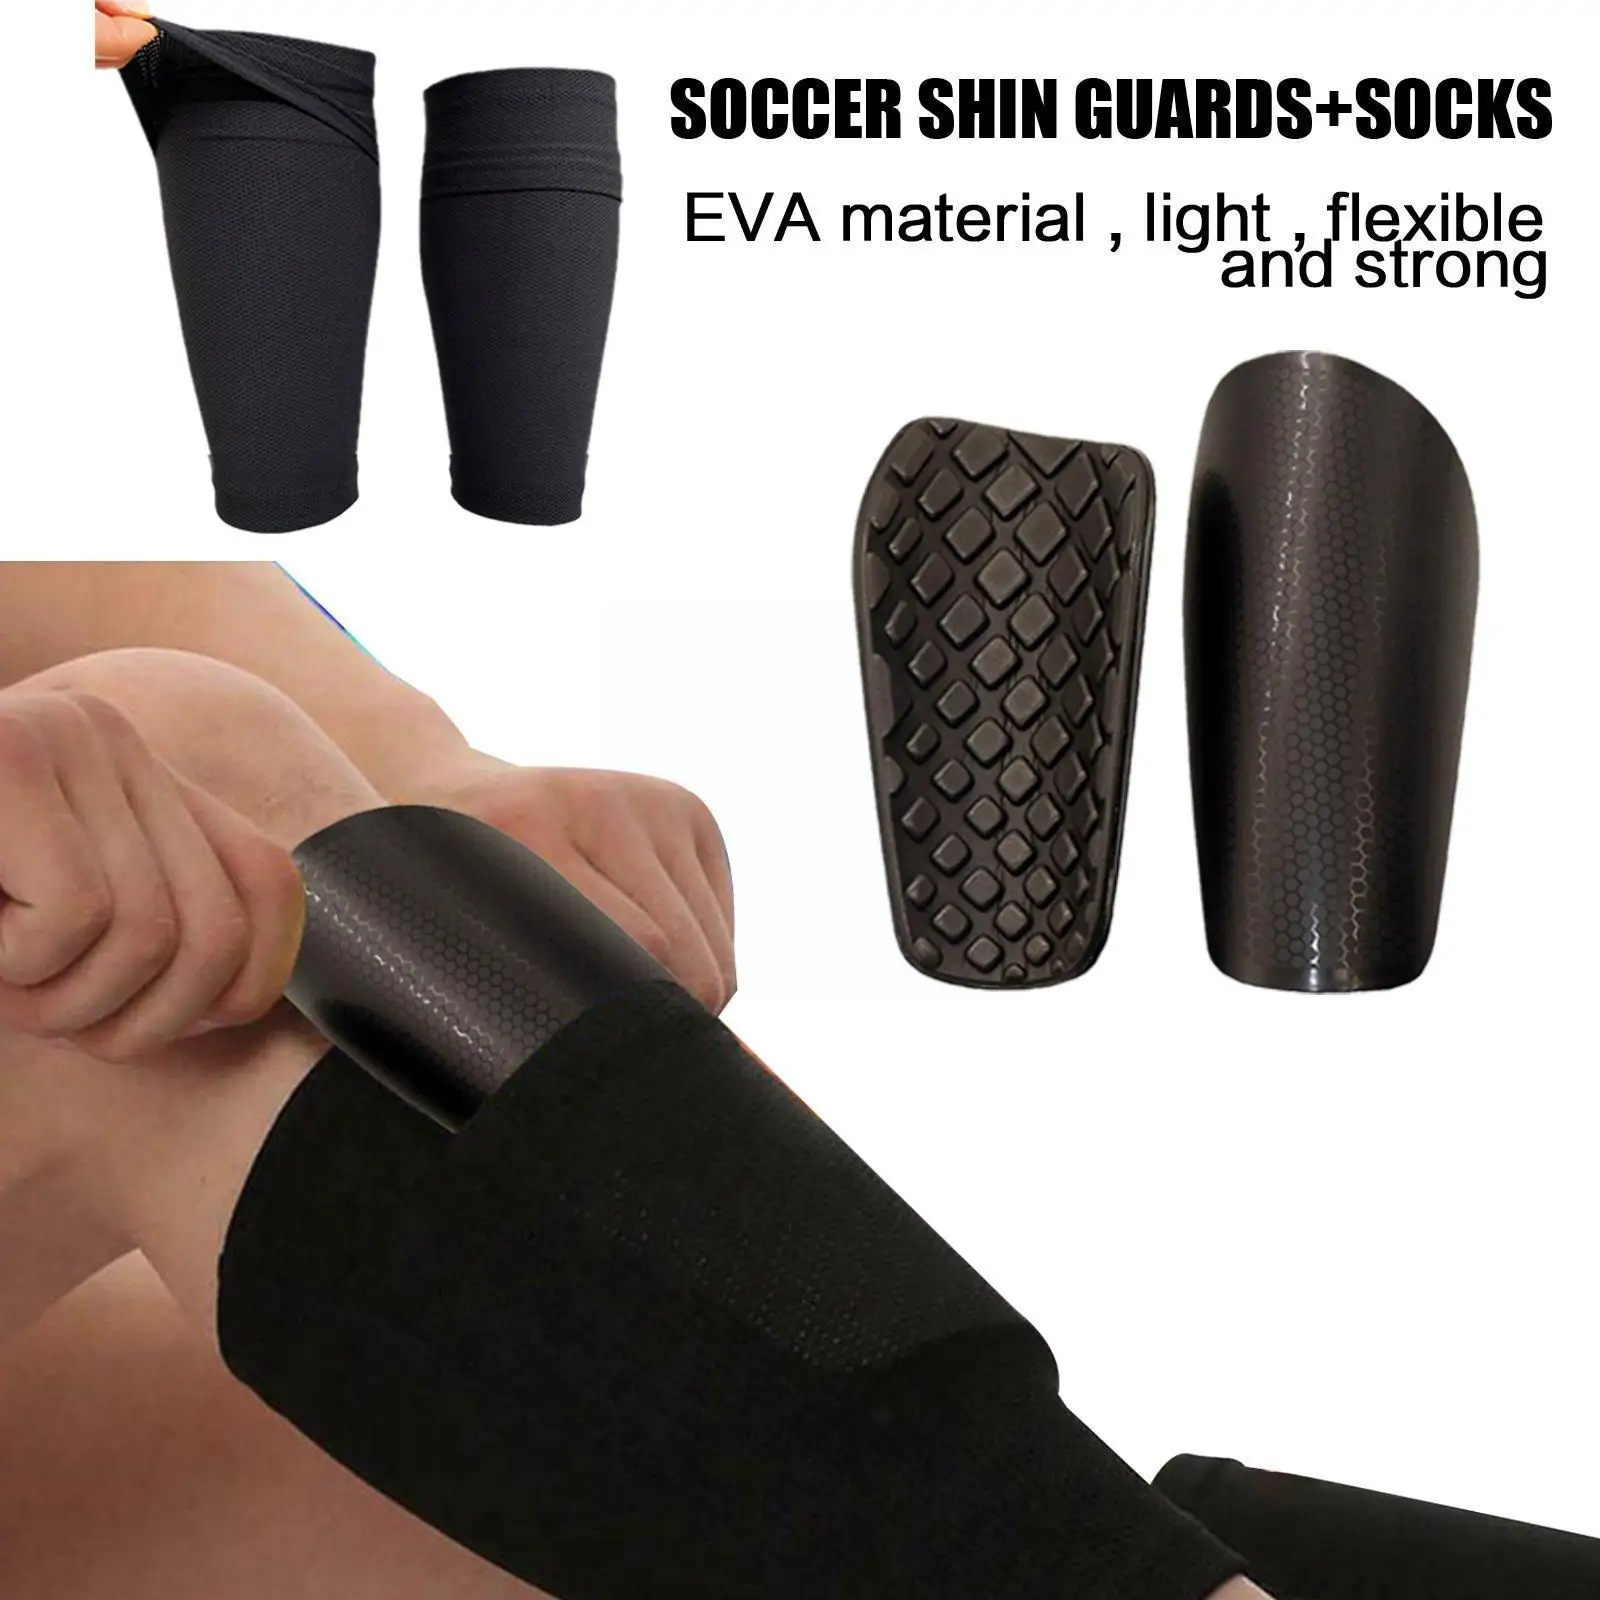 

Soccer Shin Guards Pads For Kids/adult Football Legging Shinguards Sleeves Protective Gear 1 Pair Size XS/S/M/L Football Ki T8N9